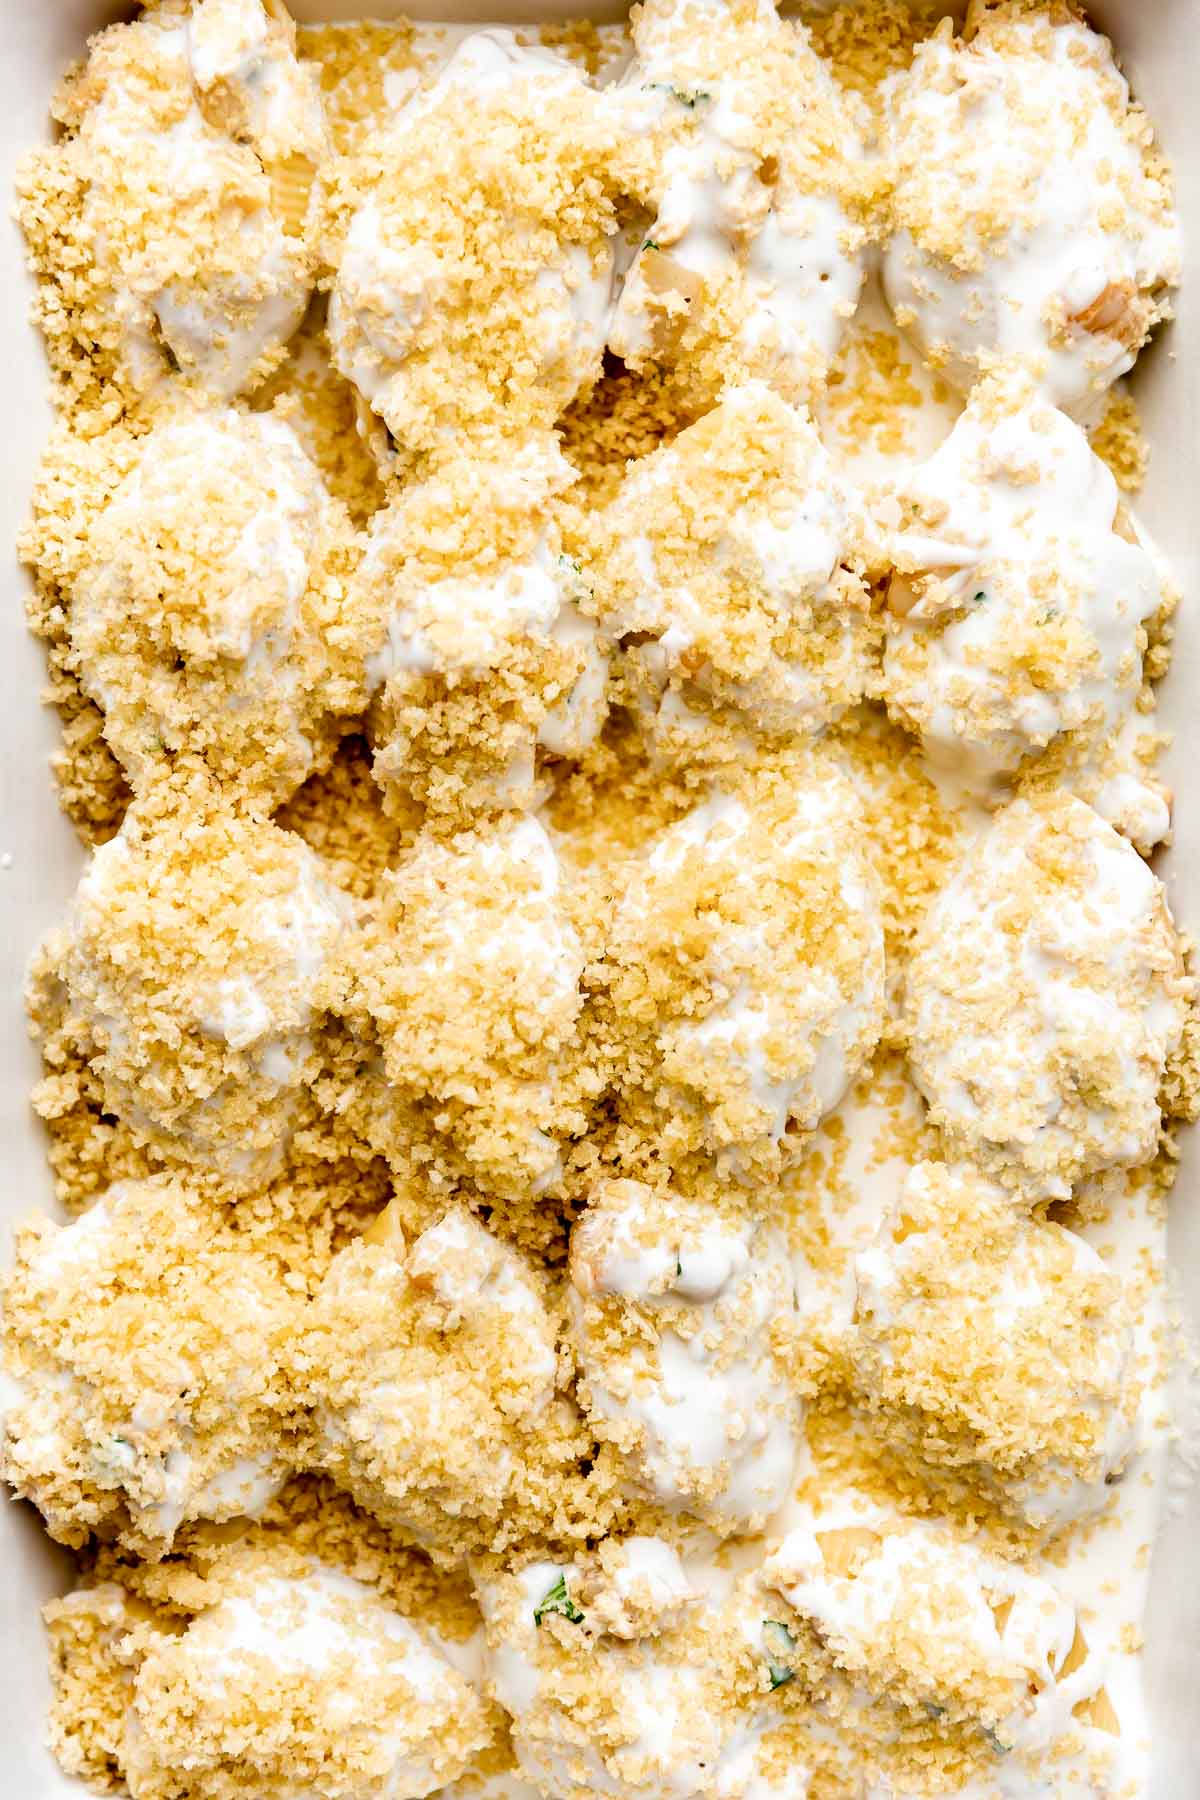 Assembled seafood stuffed shells fill a baking dish atop a layer of seafood béchamel sauce. The stuffed seafood shells have been covered in more seafood béchamel sauce and breadcrumbs.